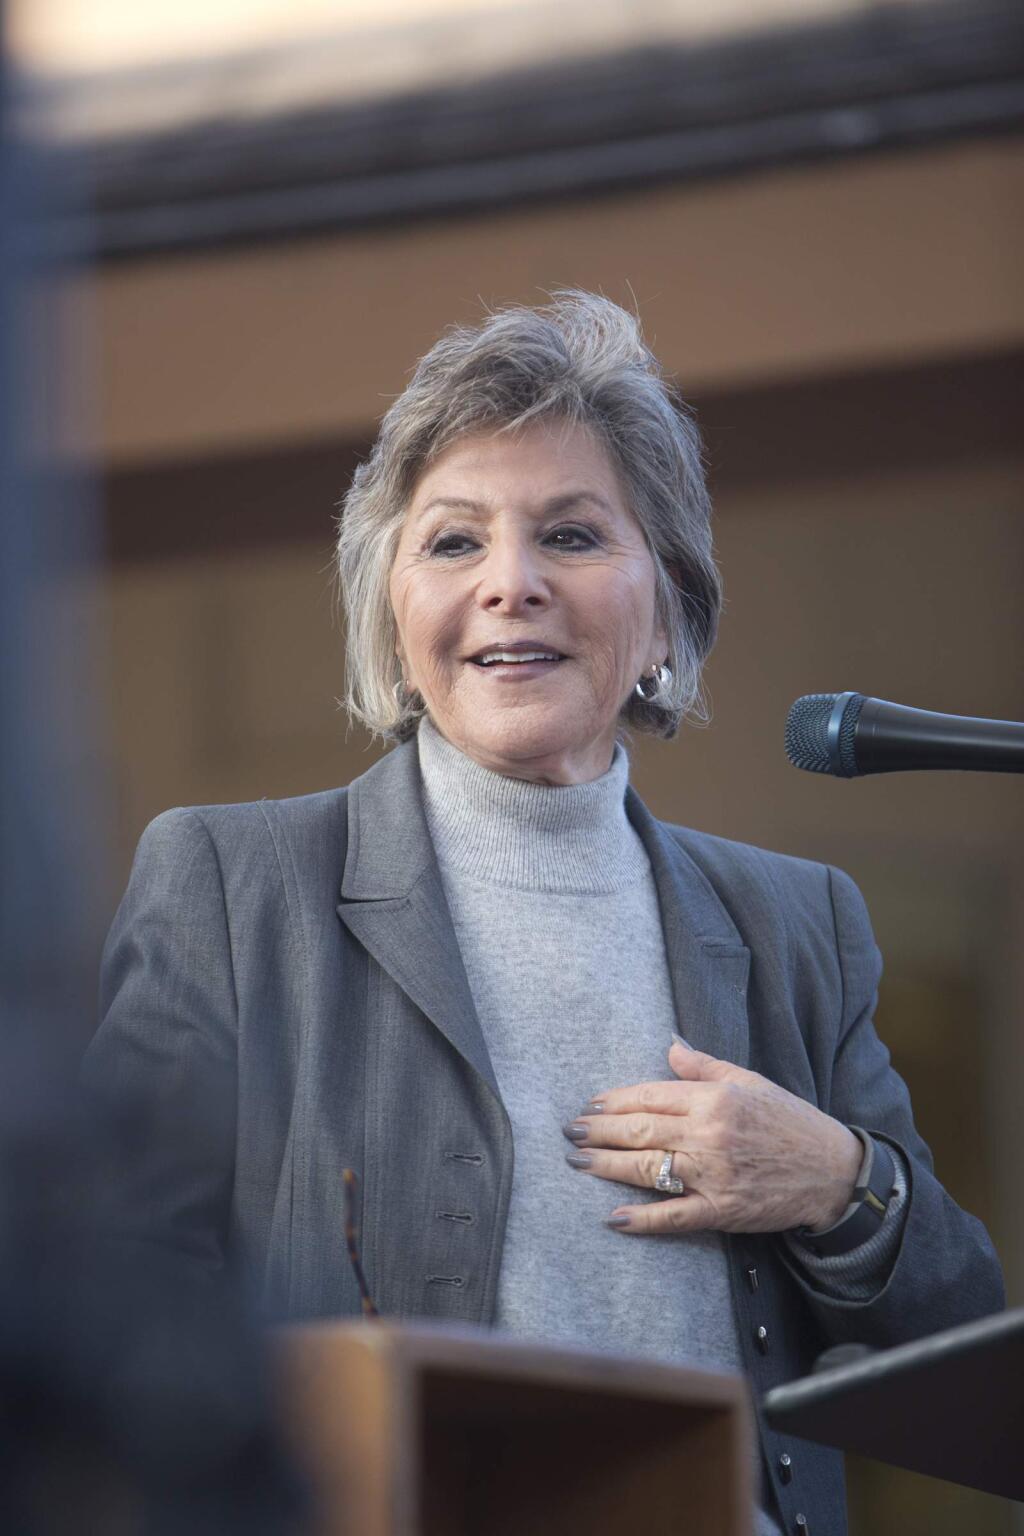 Retiring Senator Barbara Boxer promotes her autobiography 'The Art of Tough' at Copperfield's Books in Montgomery Village.